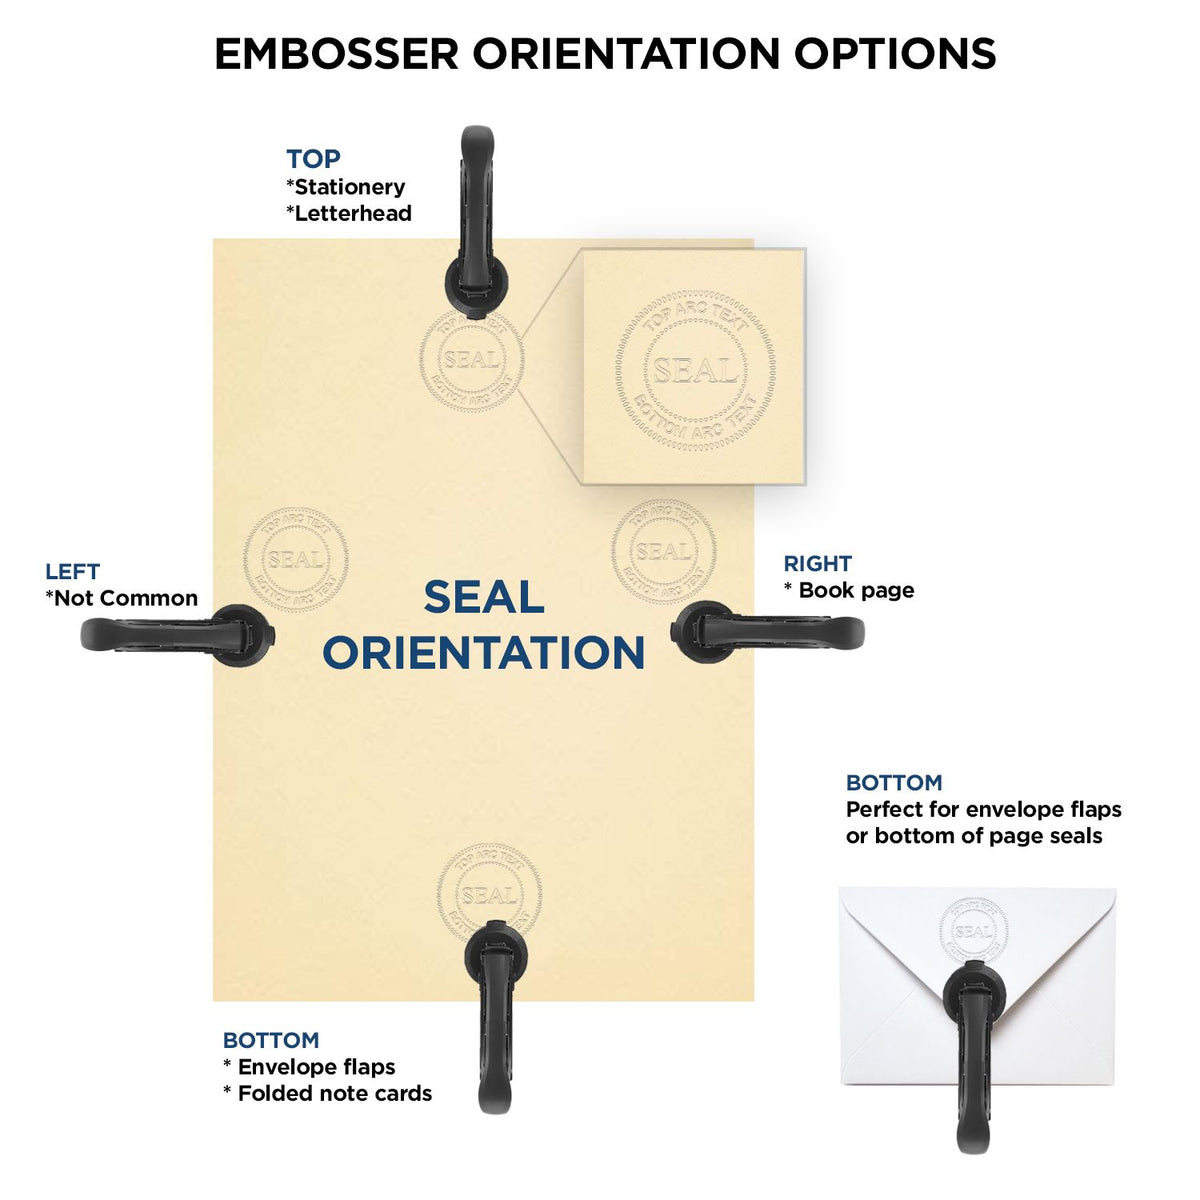 An infographic for the State of South Carolina Extended Long Reach Engineer Seal showing embosser orientation, this is showing examples of a top, bottom, right and left insert.